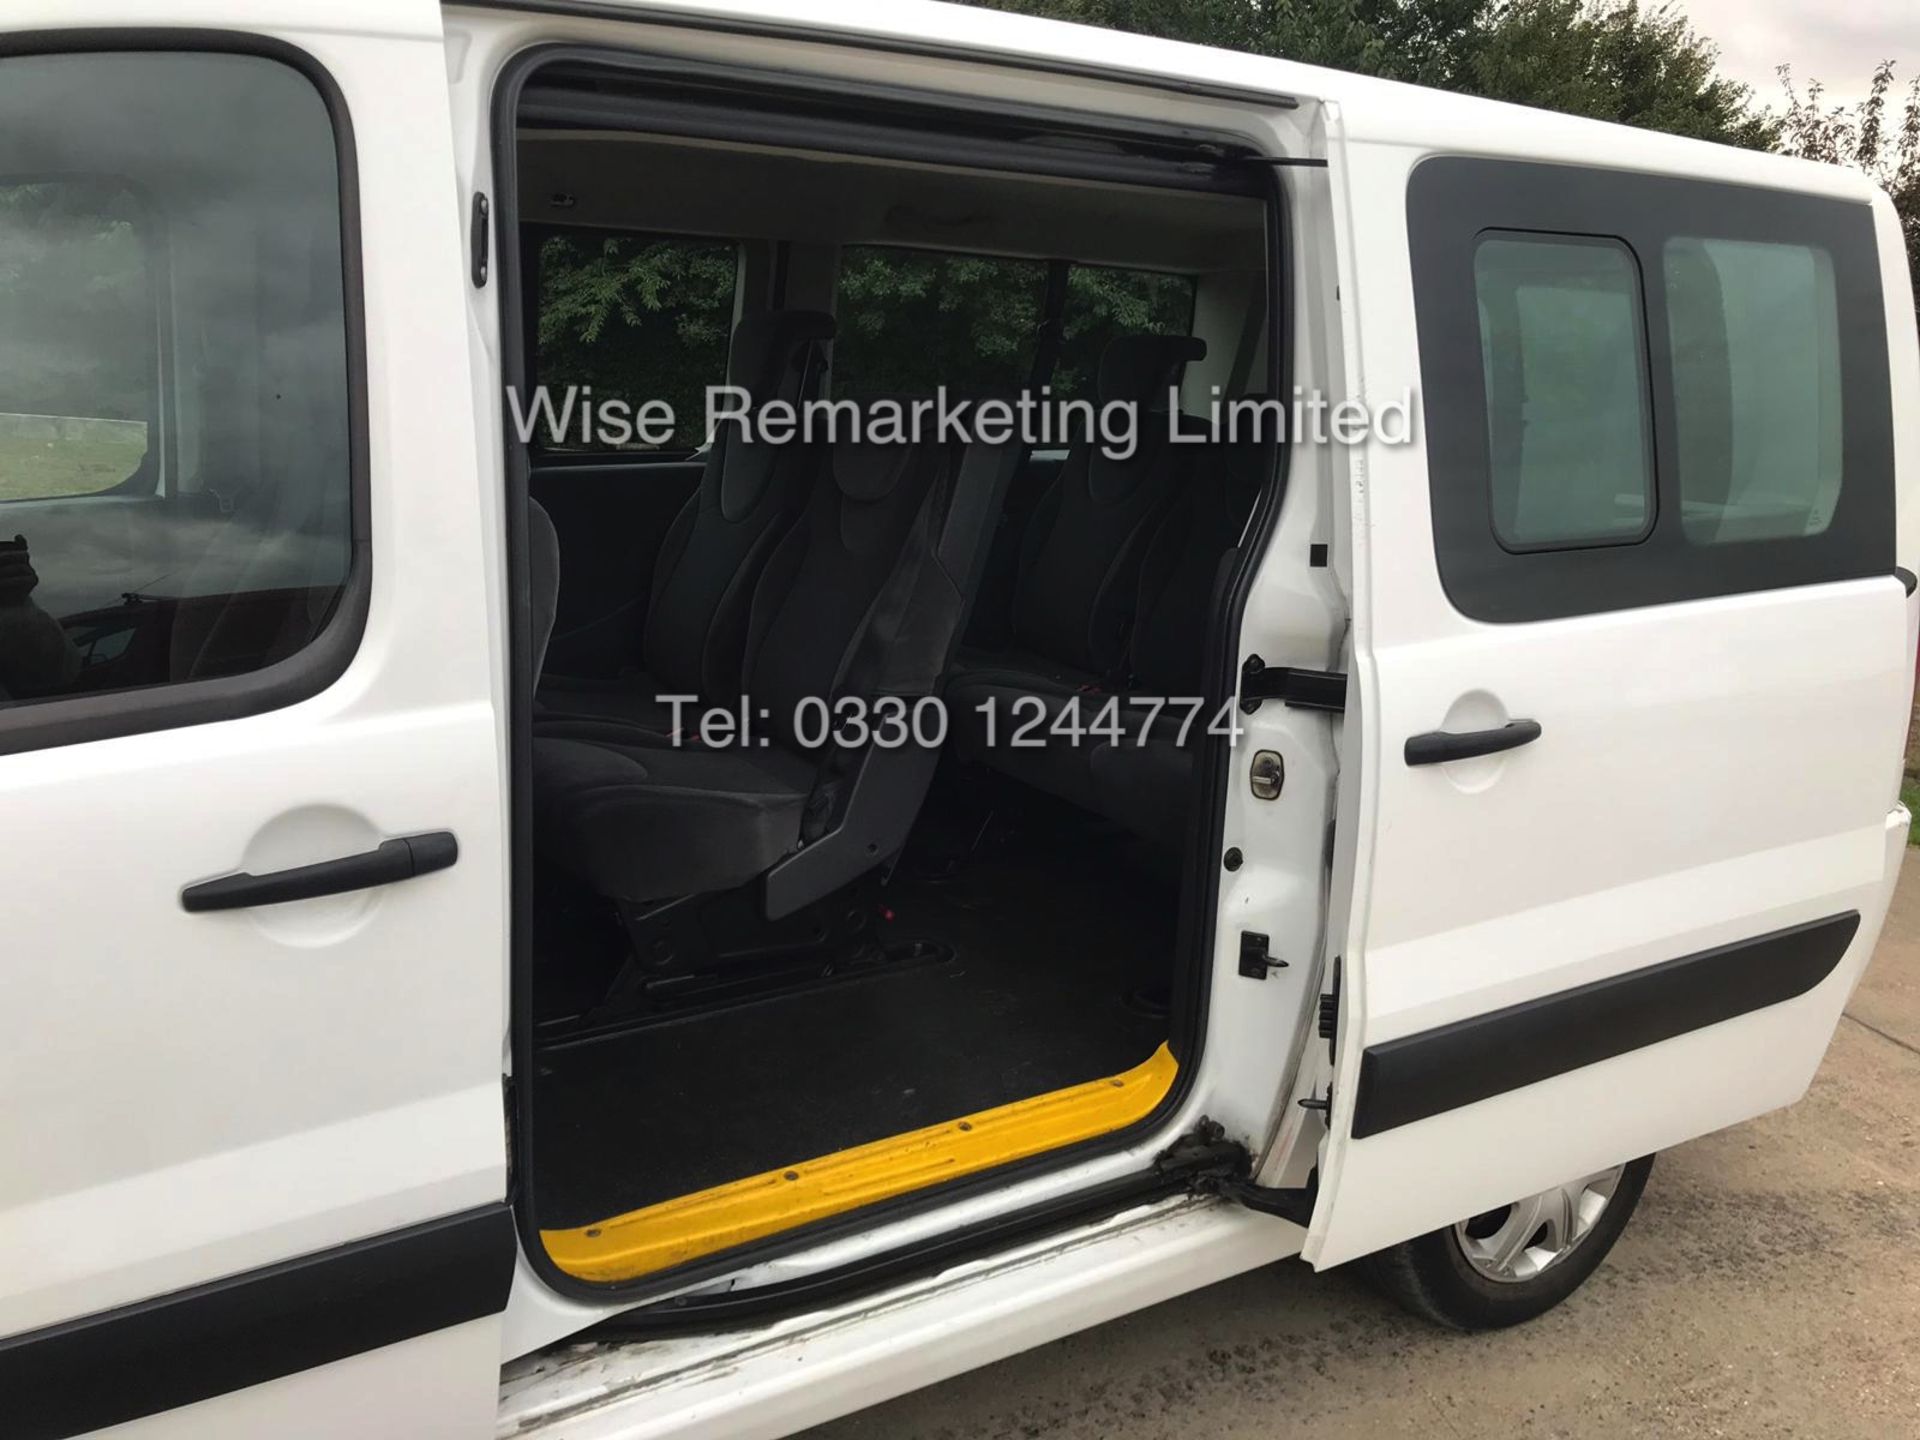 PEUGEOT EUROBUS S *MPV 8 SEATER* 2.0l (2013 - 13 REG) **AIR CON** - 1 OWNER FROM NEW - Image 18 of 19